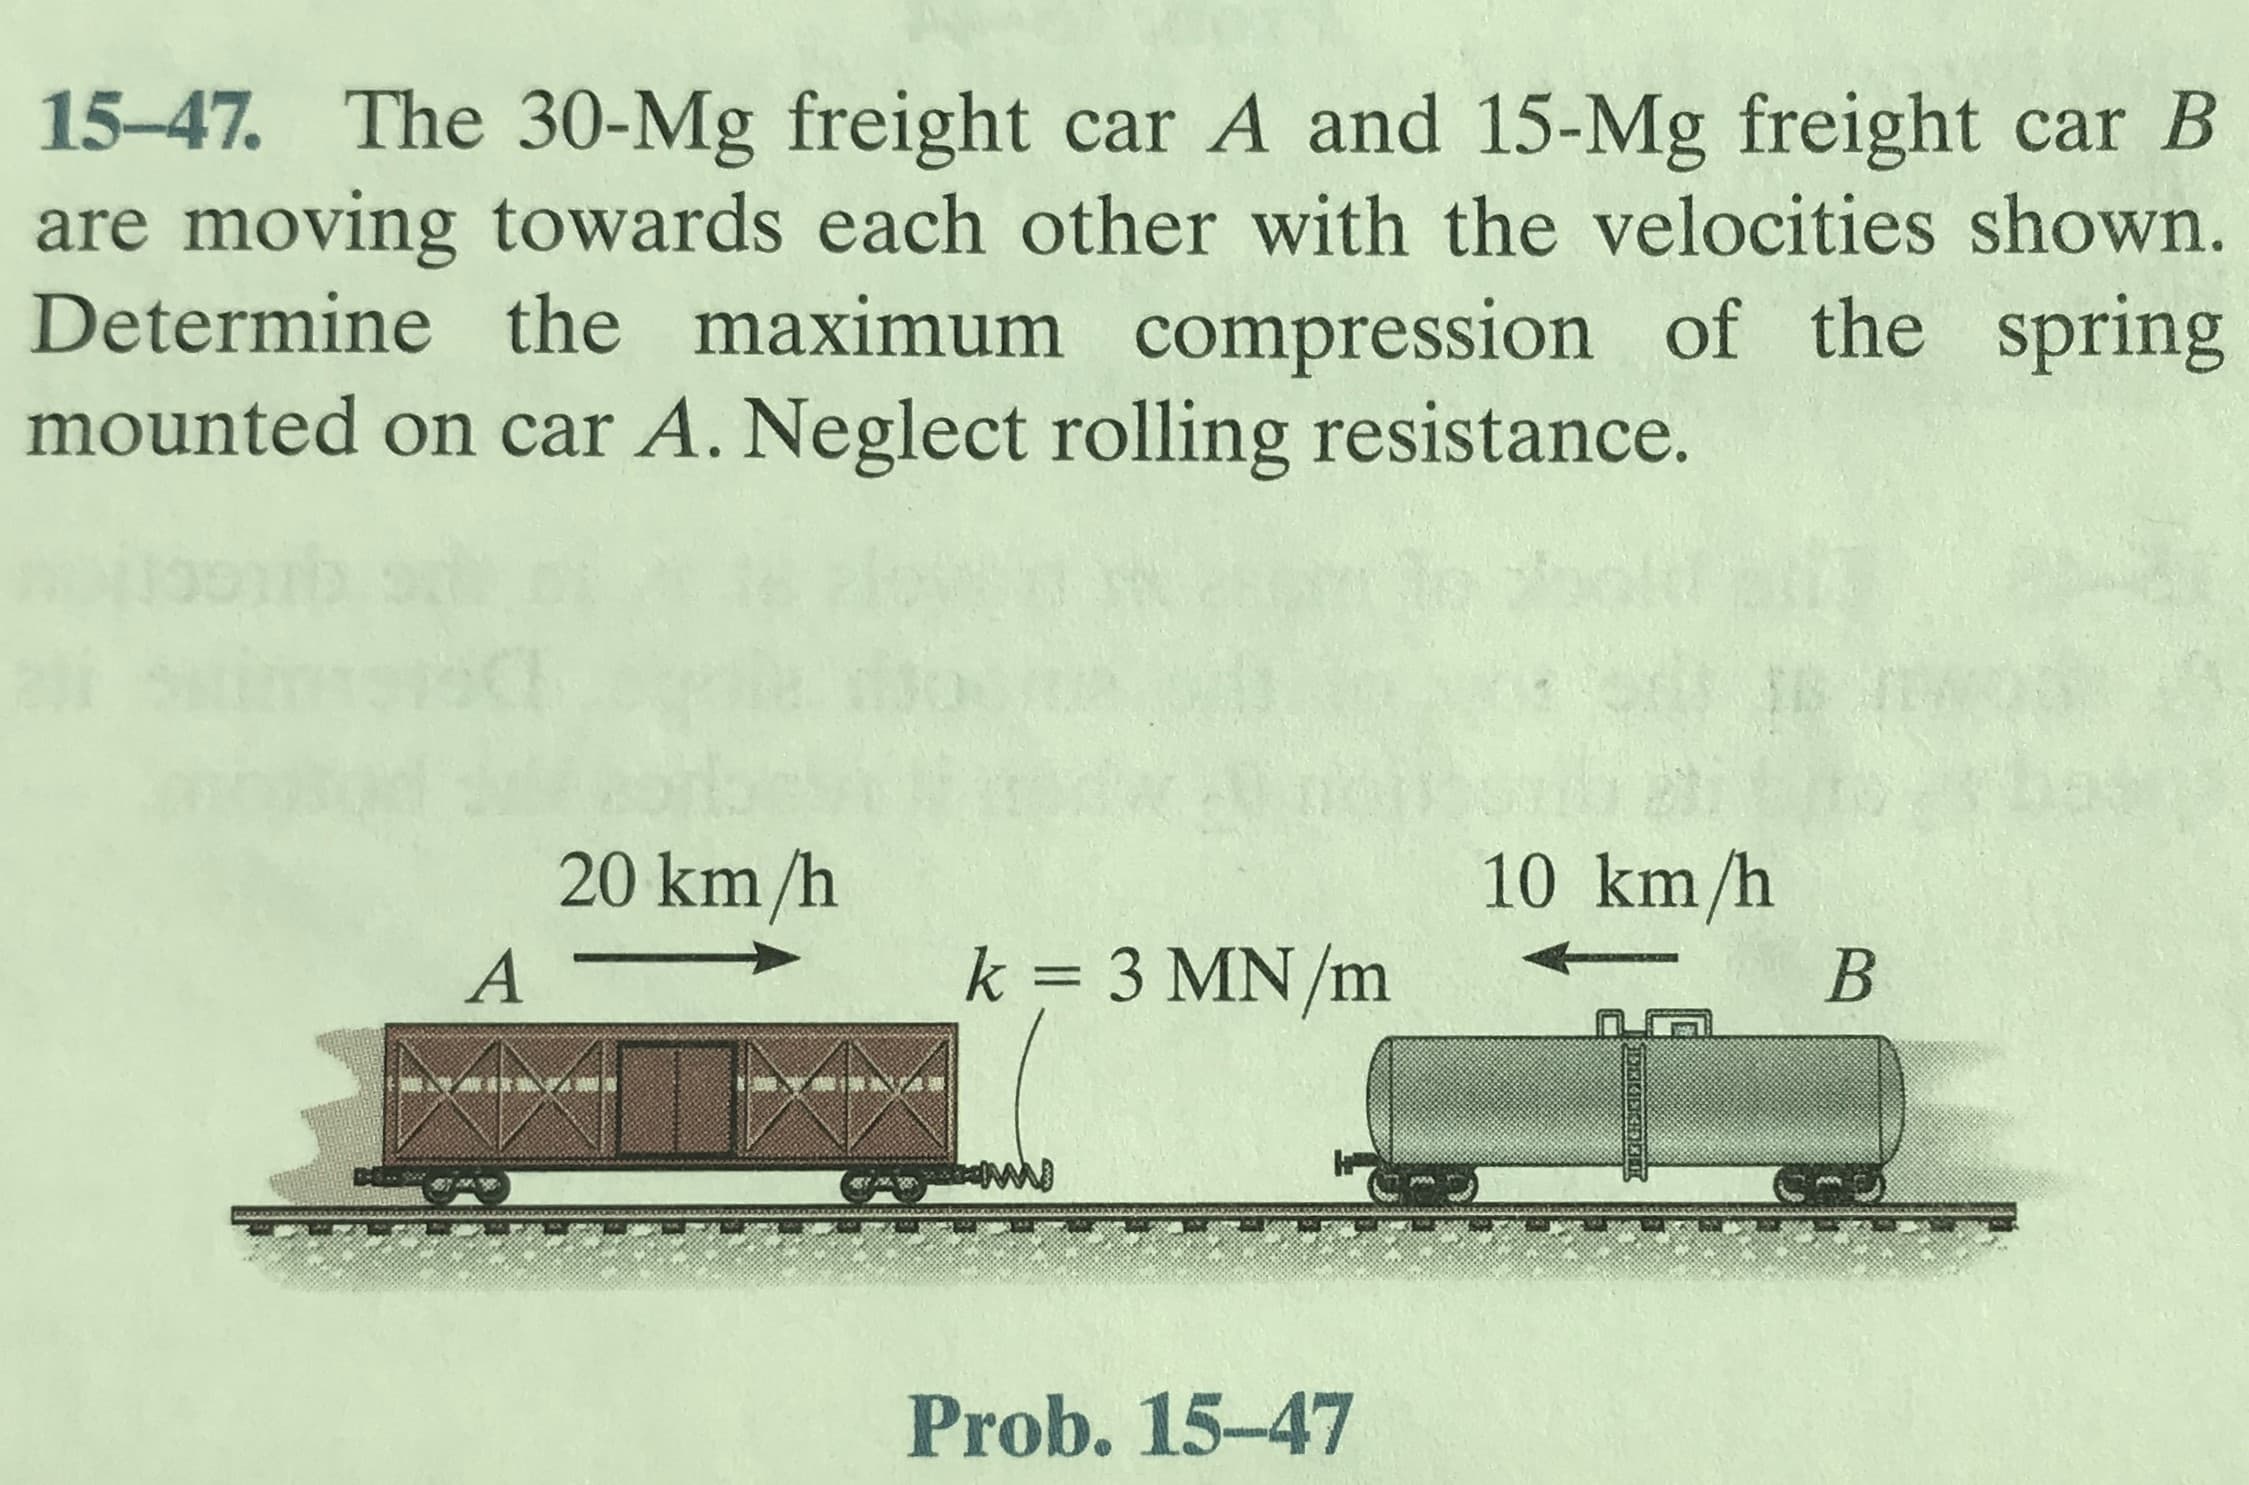 15-47. The 30-Mg freight car A and 15-Mg freight car B
are moving towards each other with the velocities shown.
Determine the maximum compression of the spring
mounted on car A. Neglect rolling resistance.
20 km/h
10 km/h
k = 3 MN/m
Prob. 15-47
